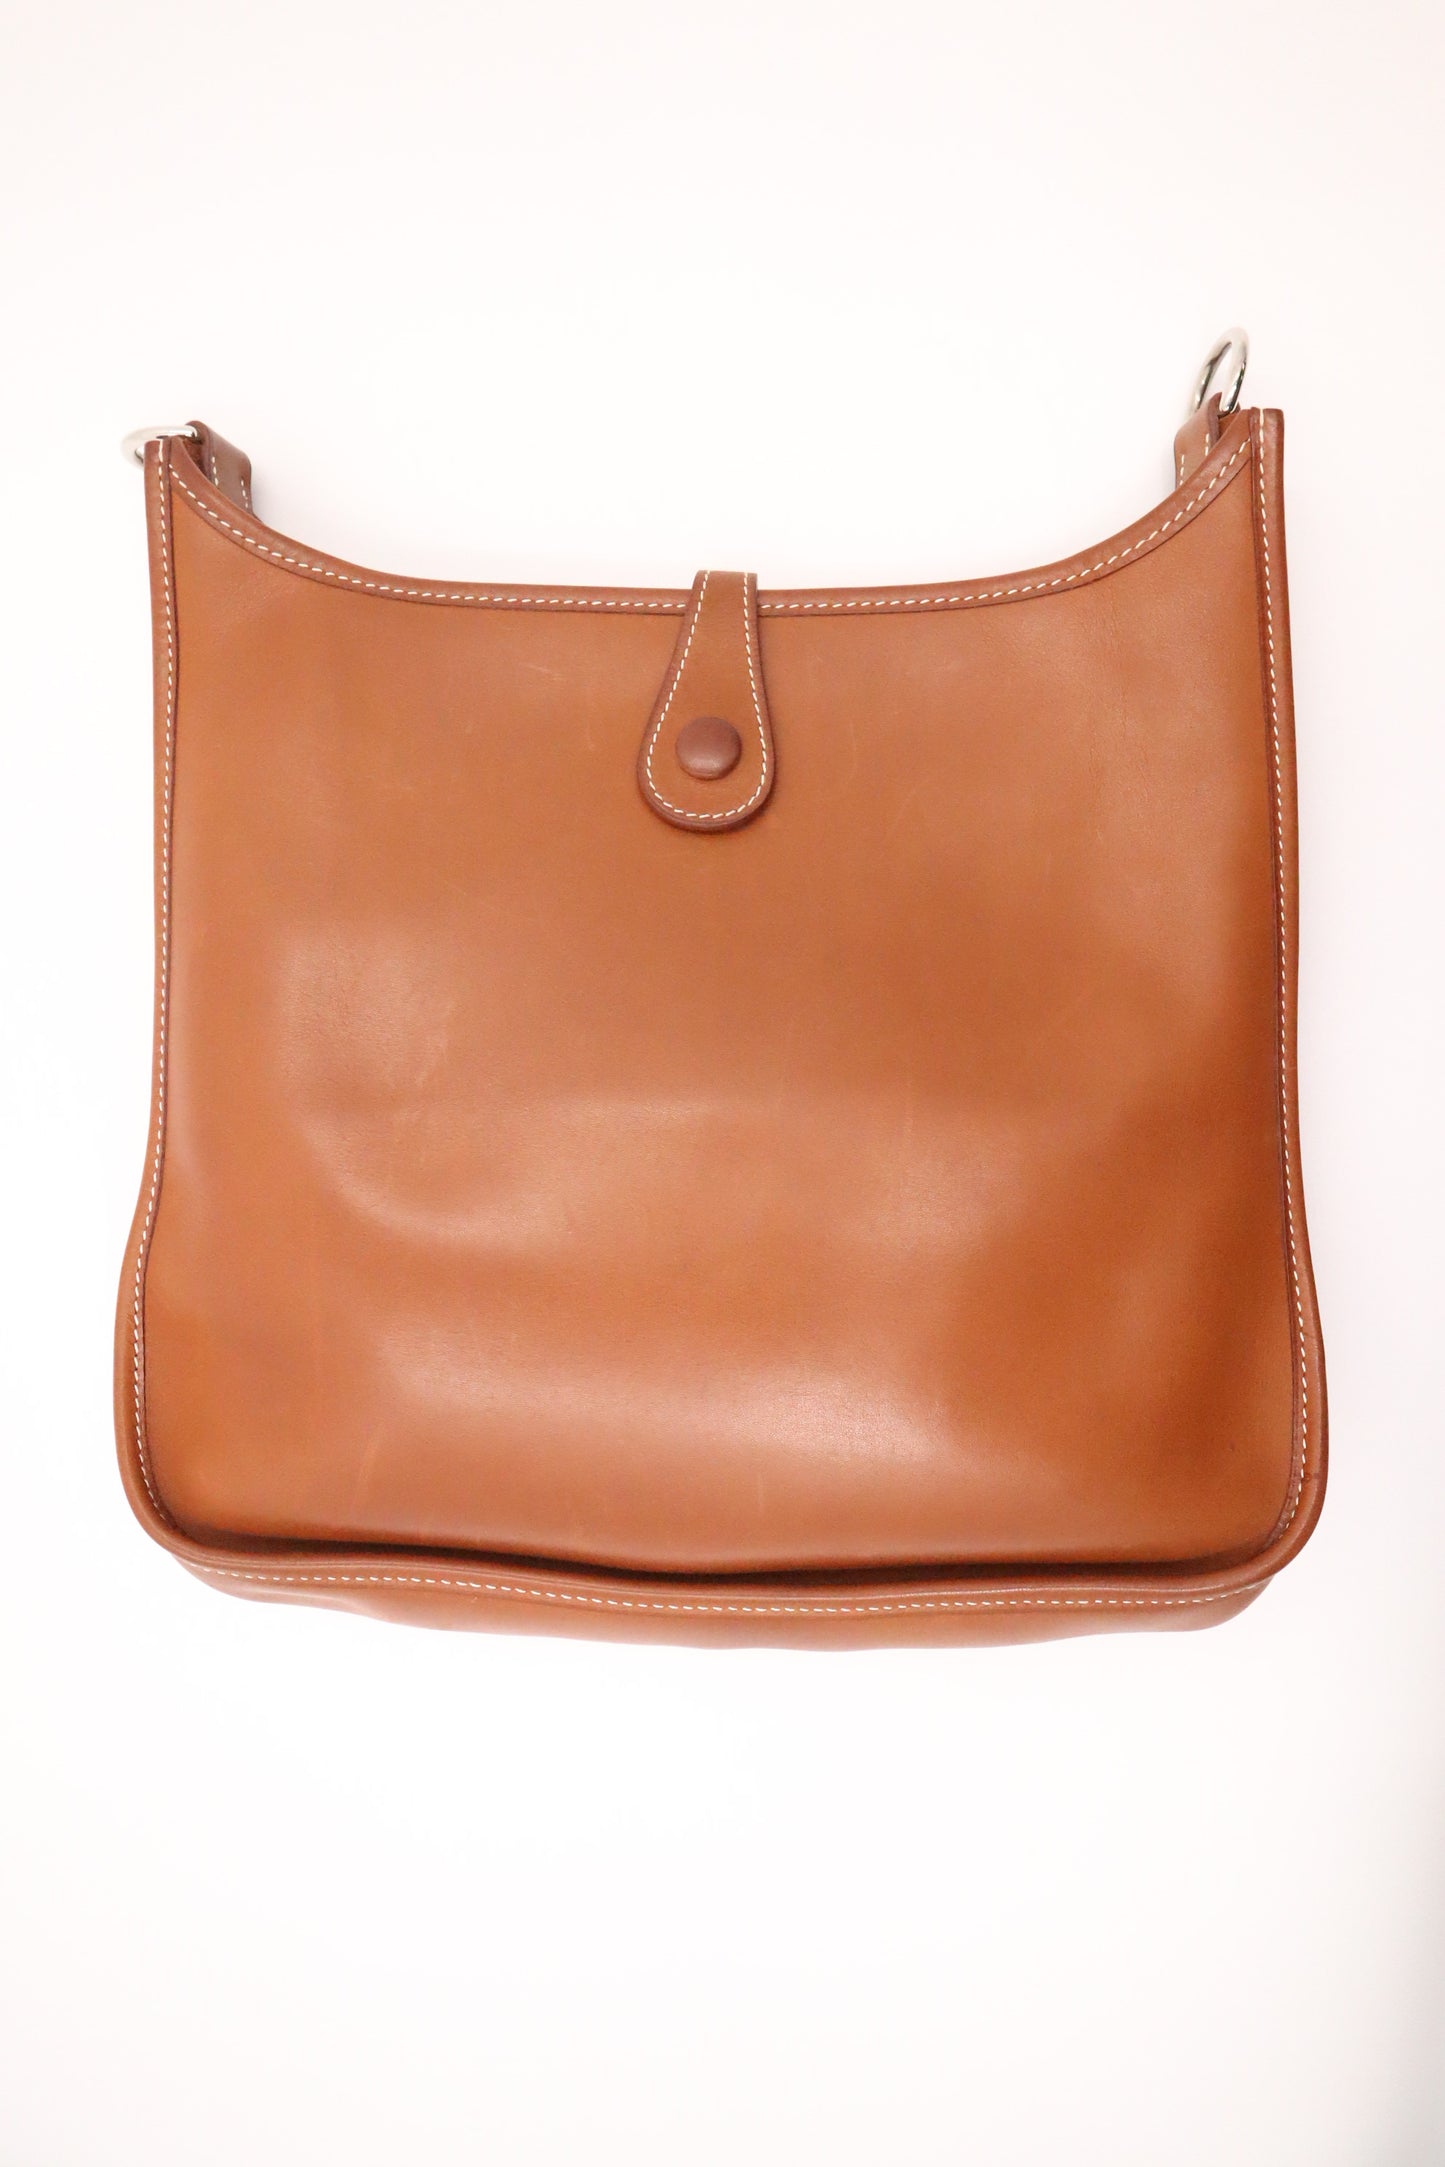 Hermes Evelyne PM in Brown Leather